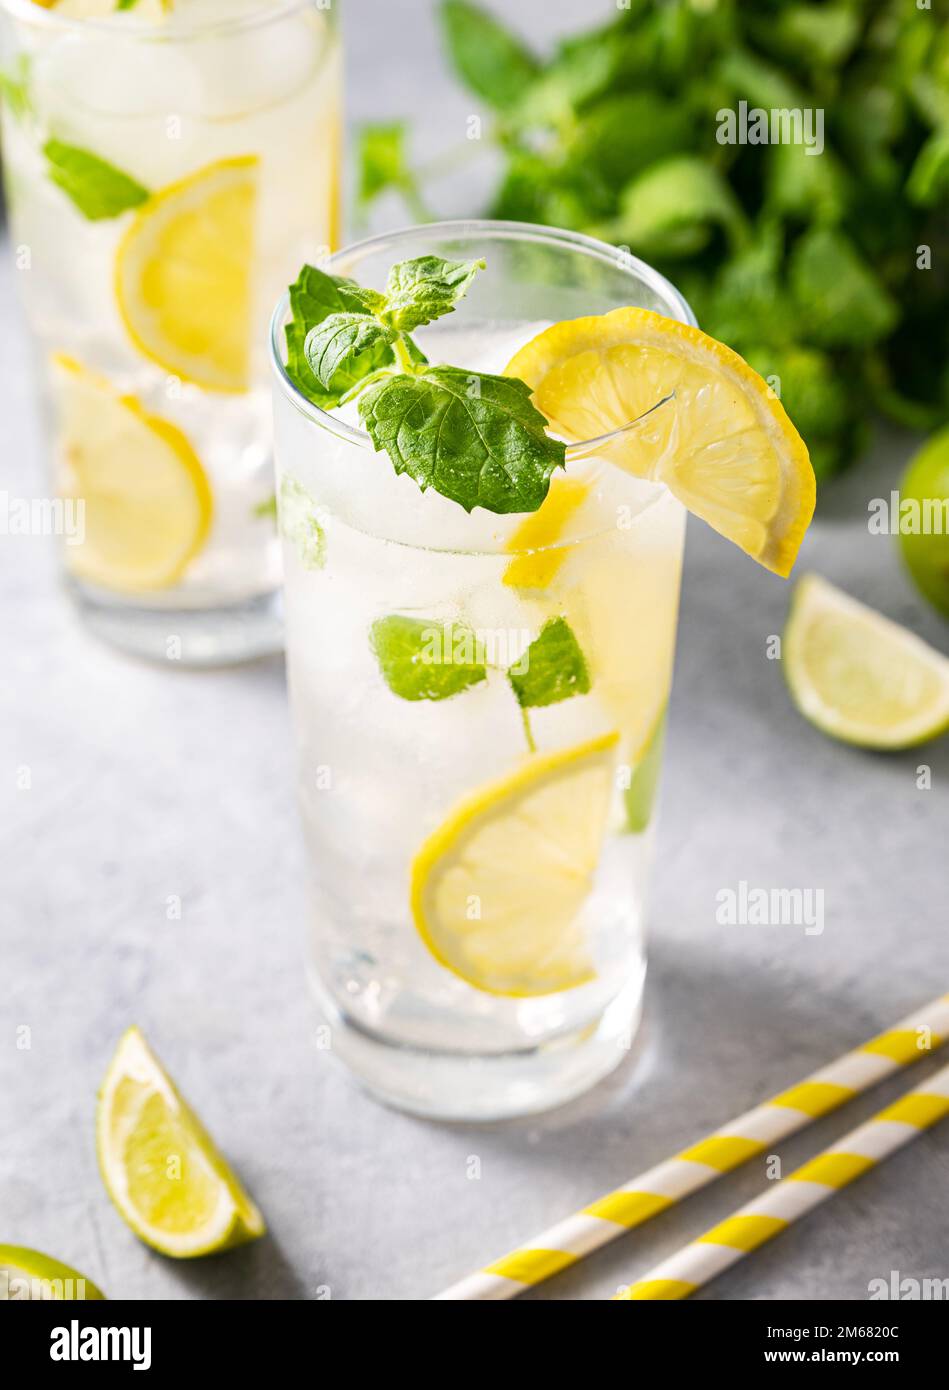 Mojito drink with fresh lemons. Refreshing cocktail with lime, lemon, mint and ice in a tall glass on gray background. Summer cold drinks concept. Stock Photo